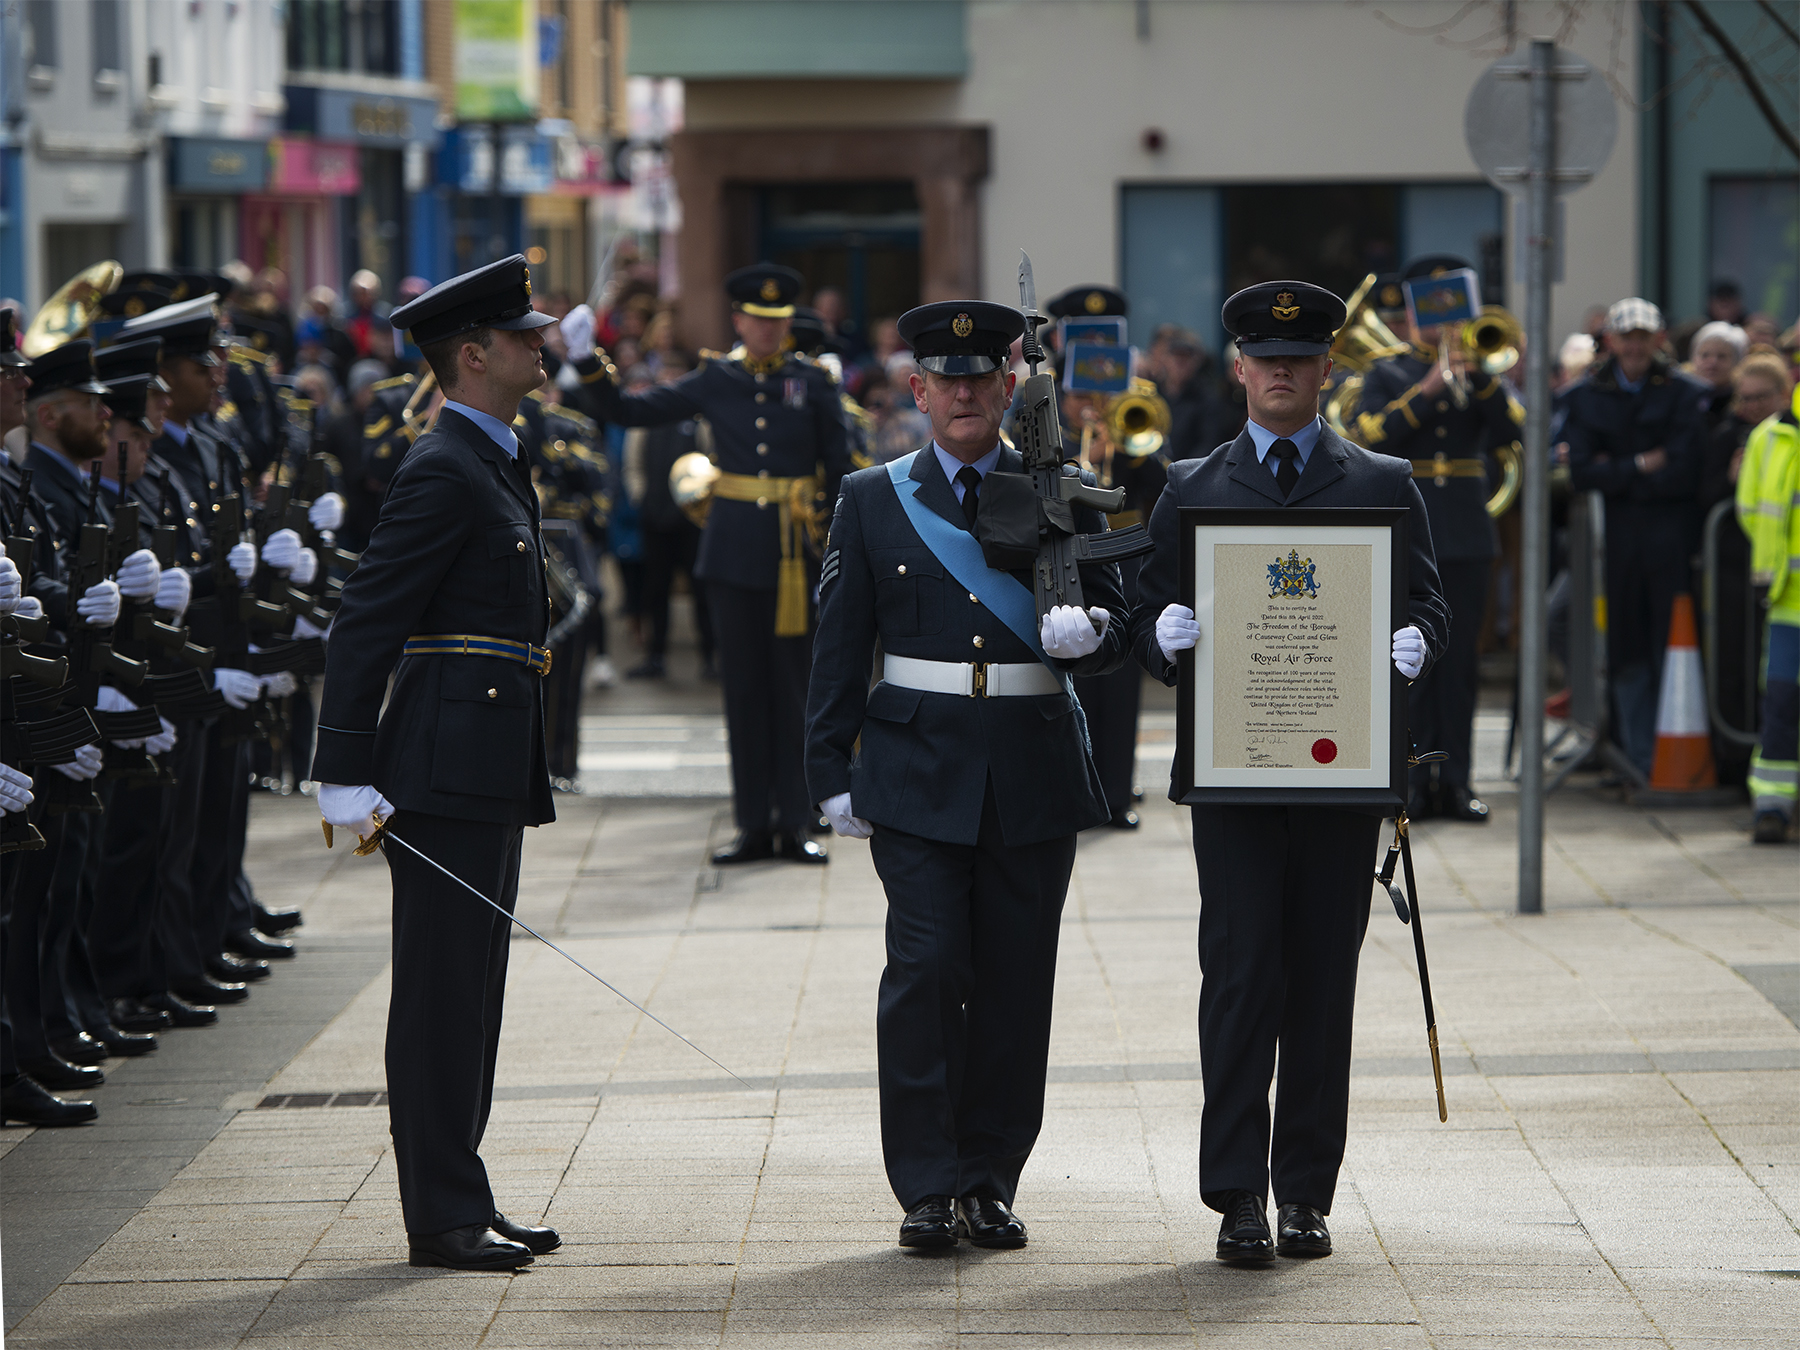 Personnel parade with Ceremonial Certificate.